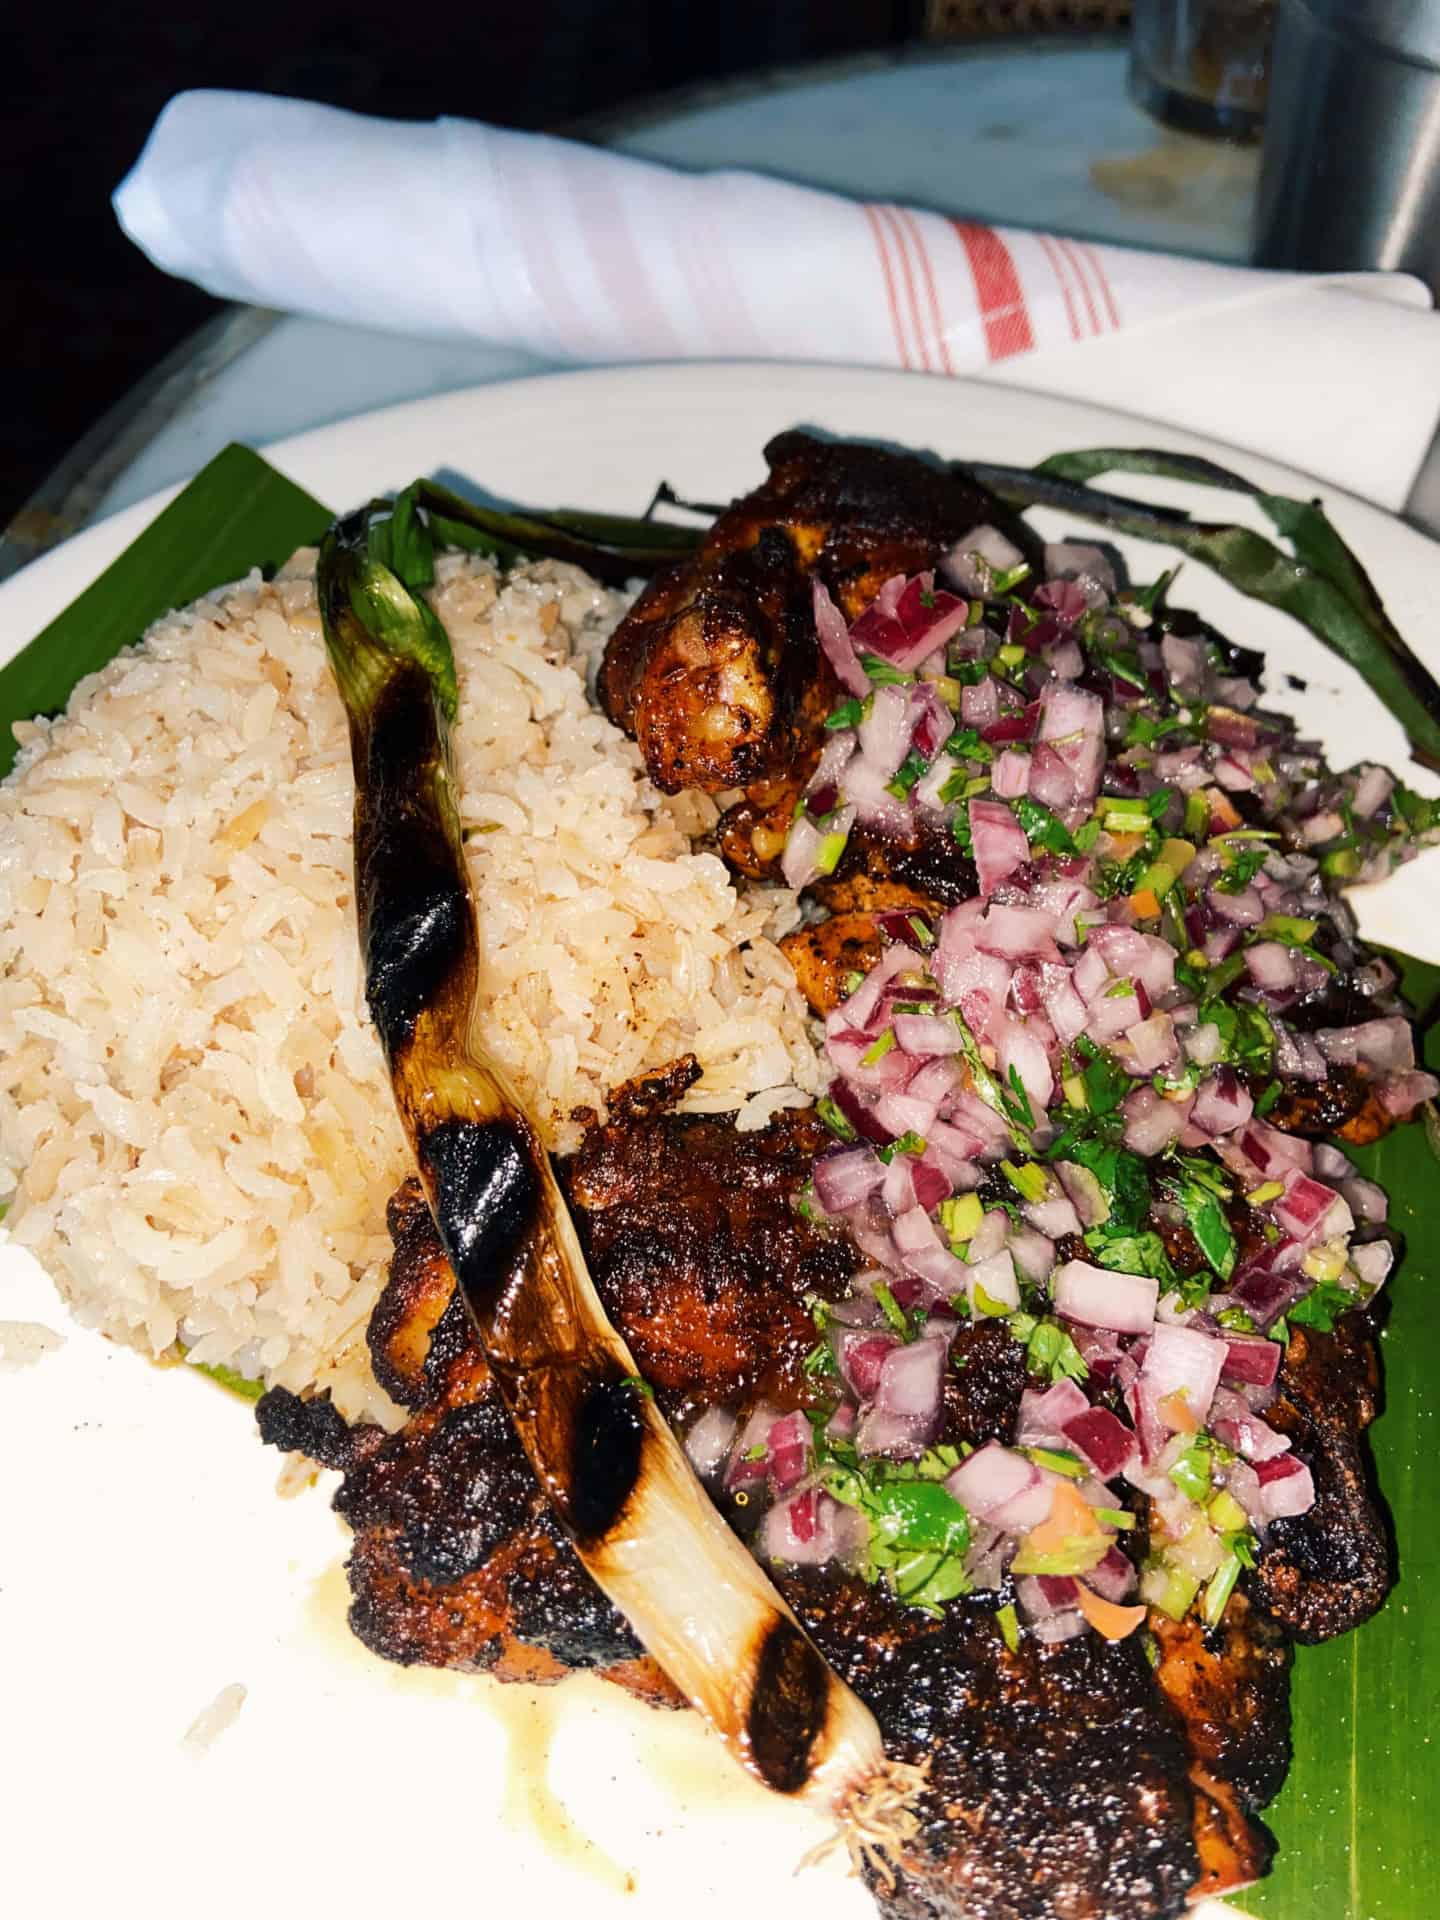 Chingón serves achiote chicken with mint rice in a popup at the Airport Rooms.